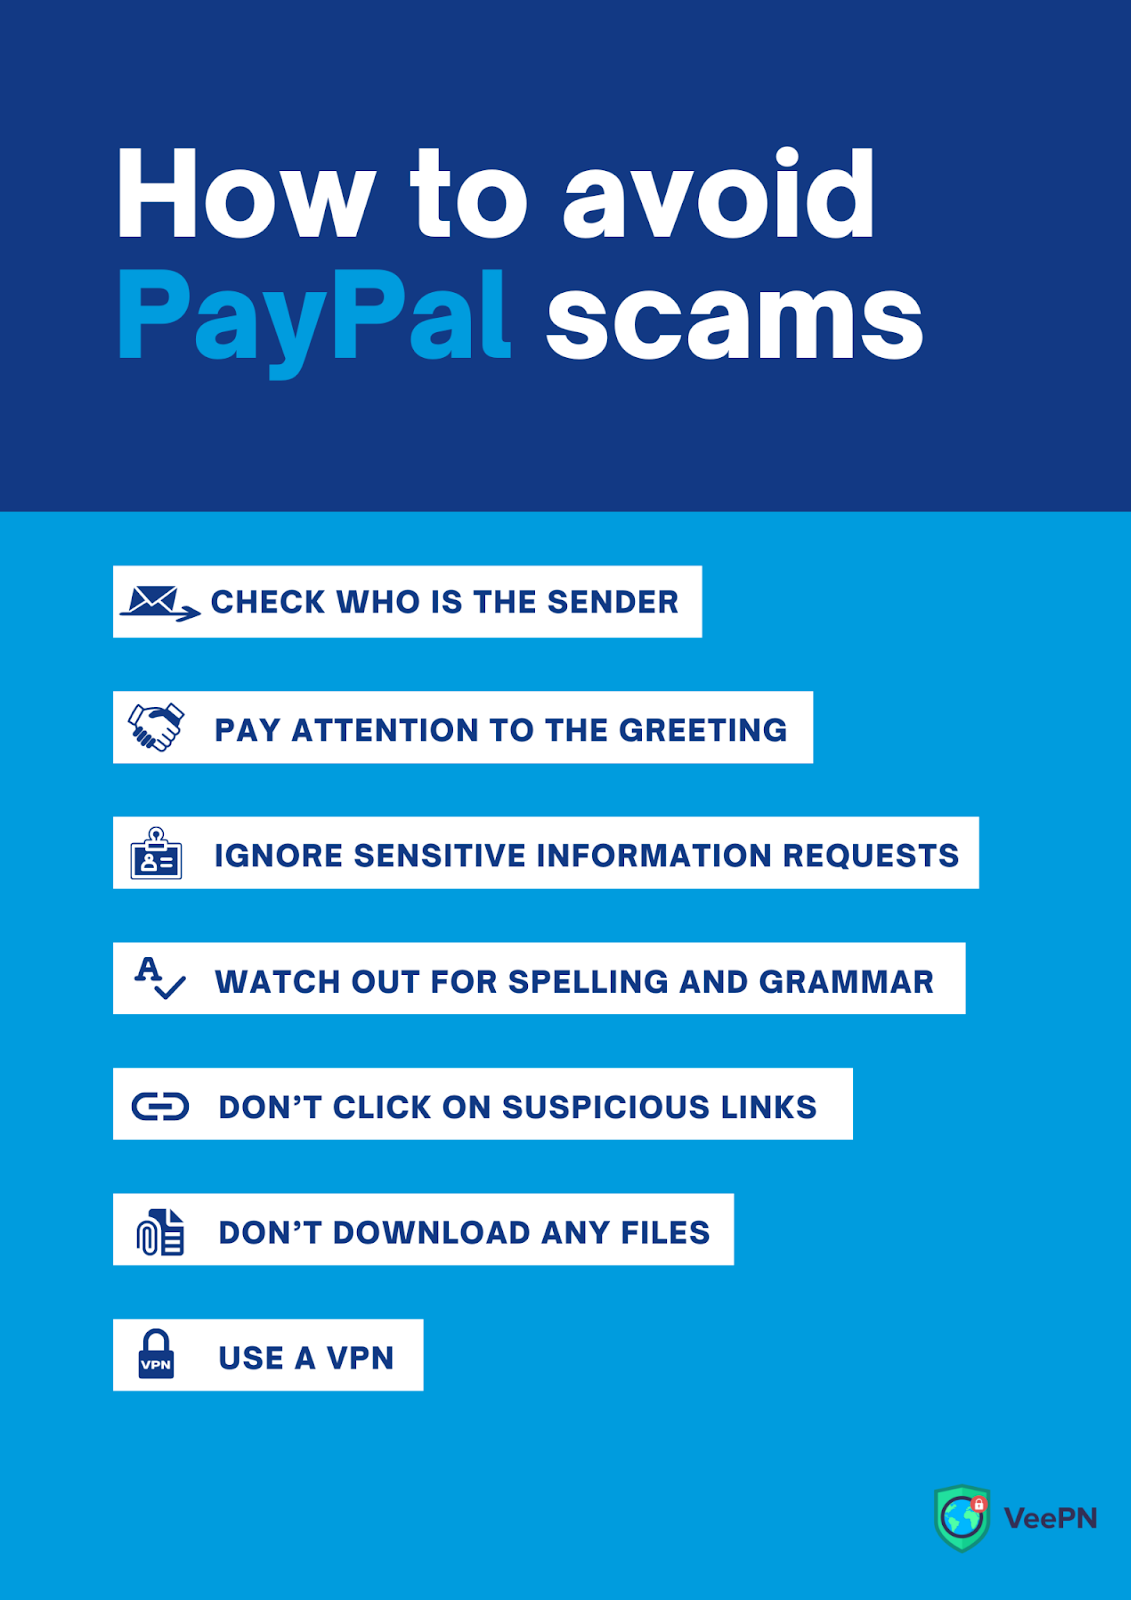 How to avoid PayPal scams